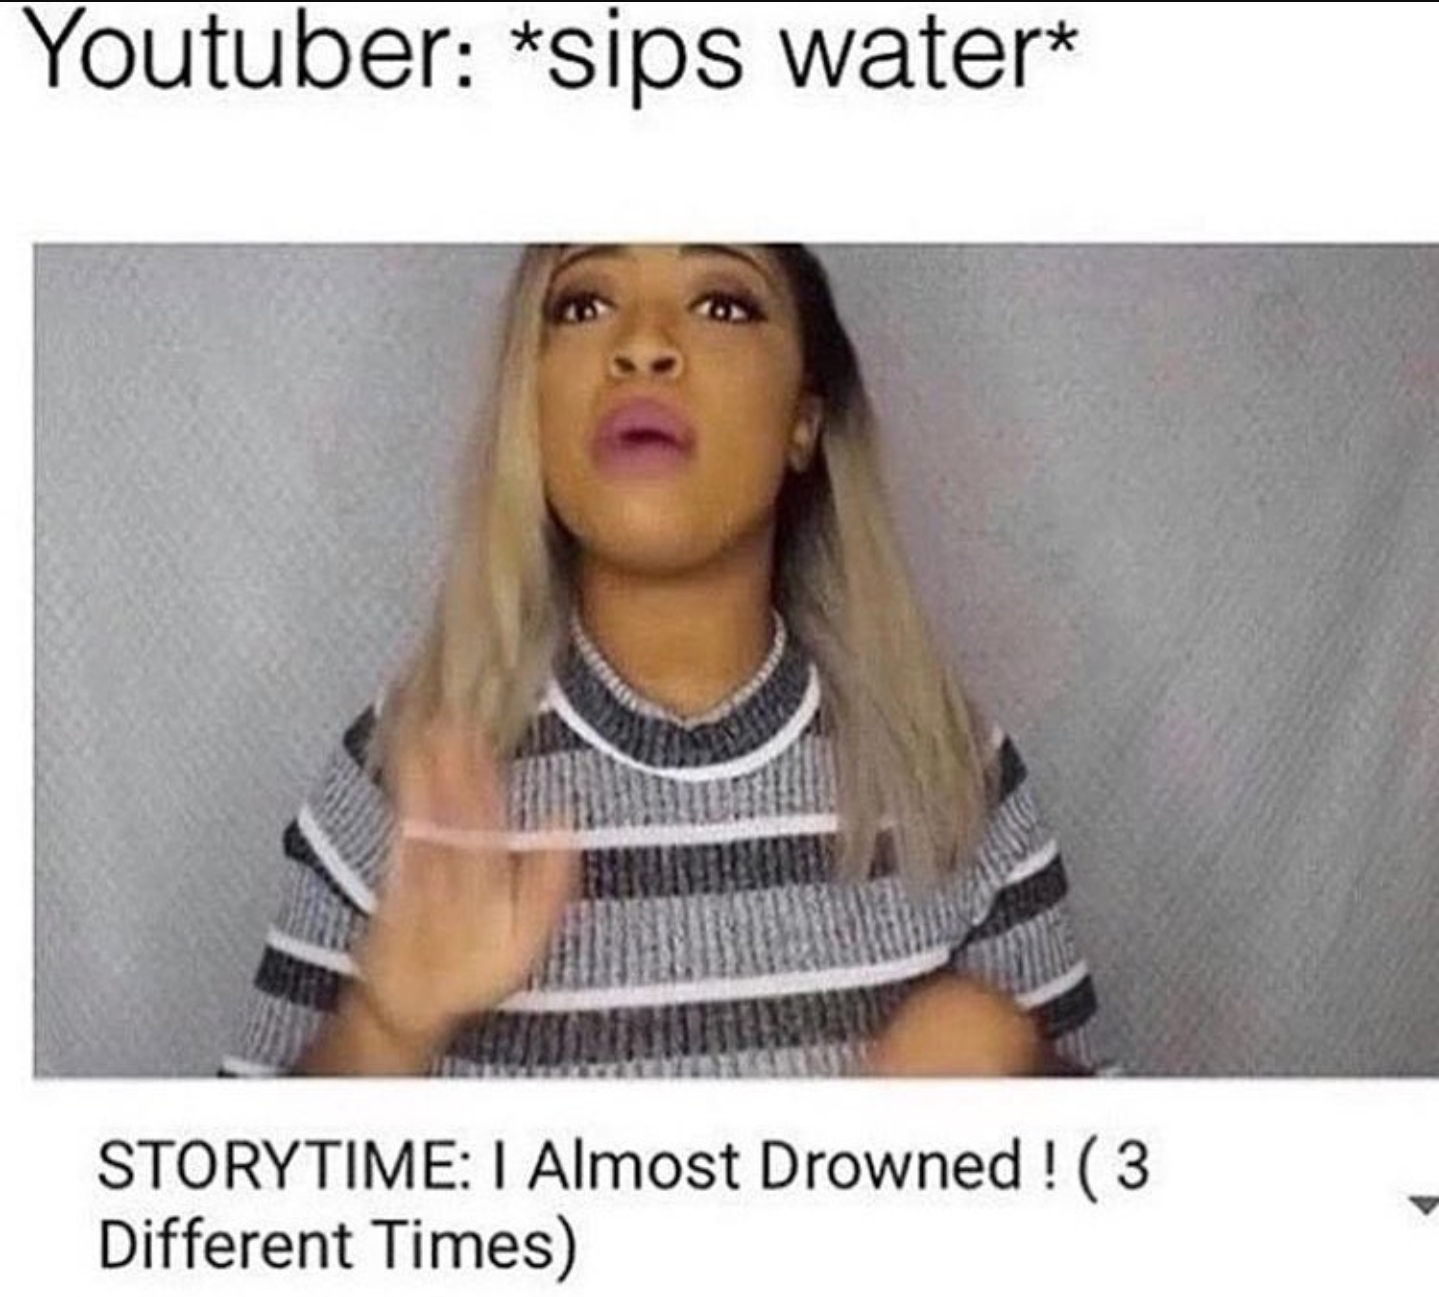 youtube meme about youtuber sipping water and then claiming they almost drowned.